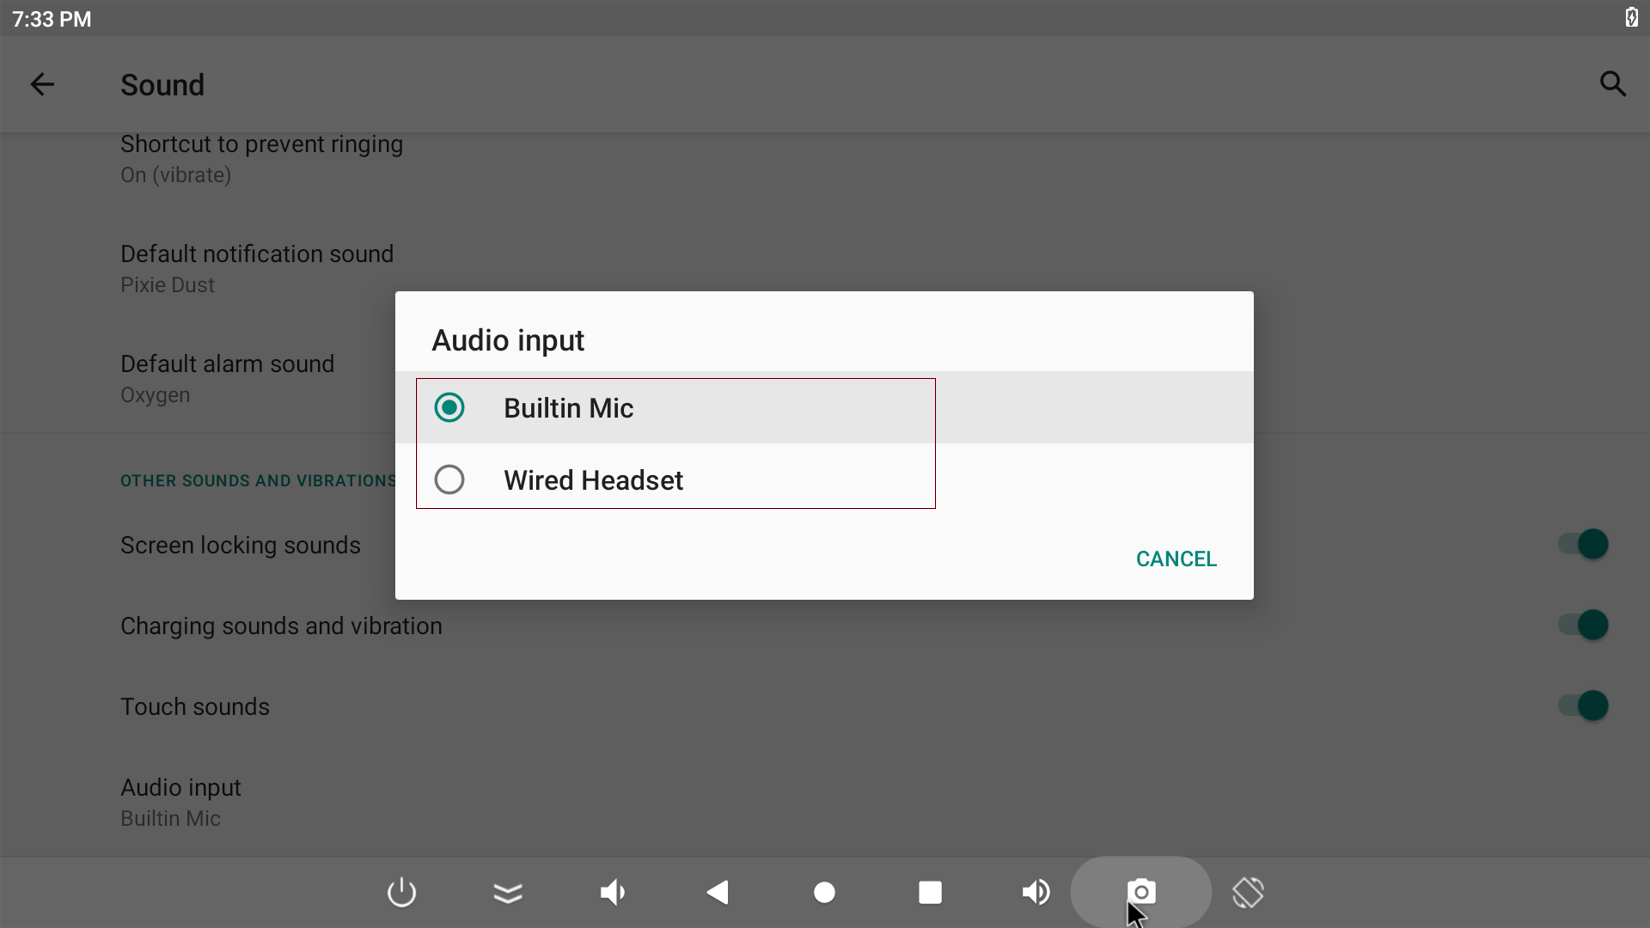 _images/faqs_android_audio_input.png